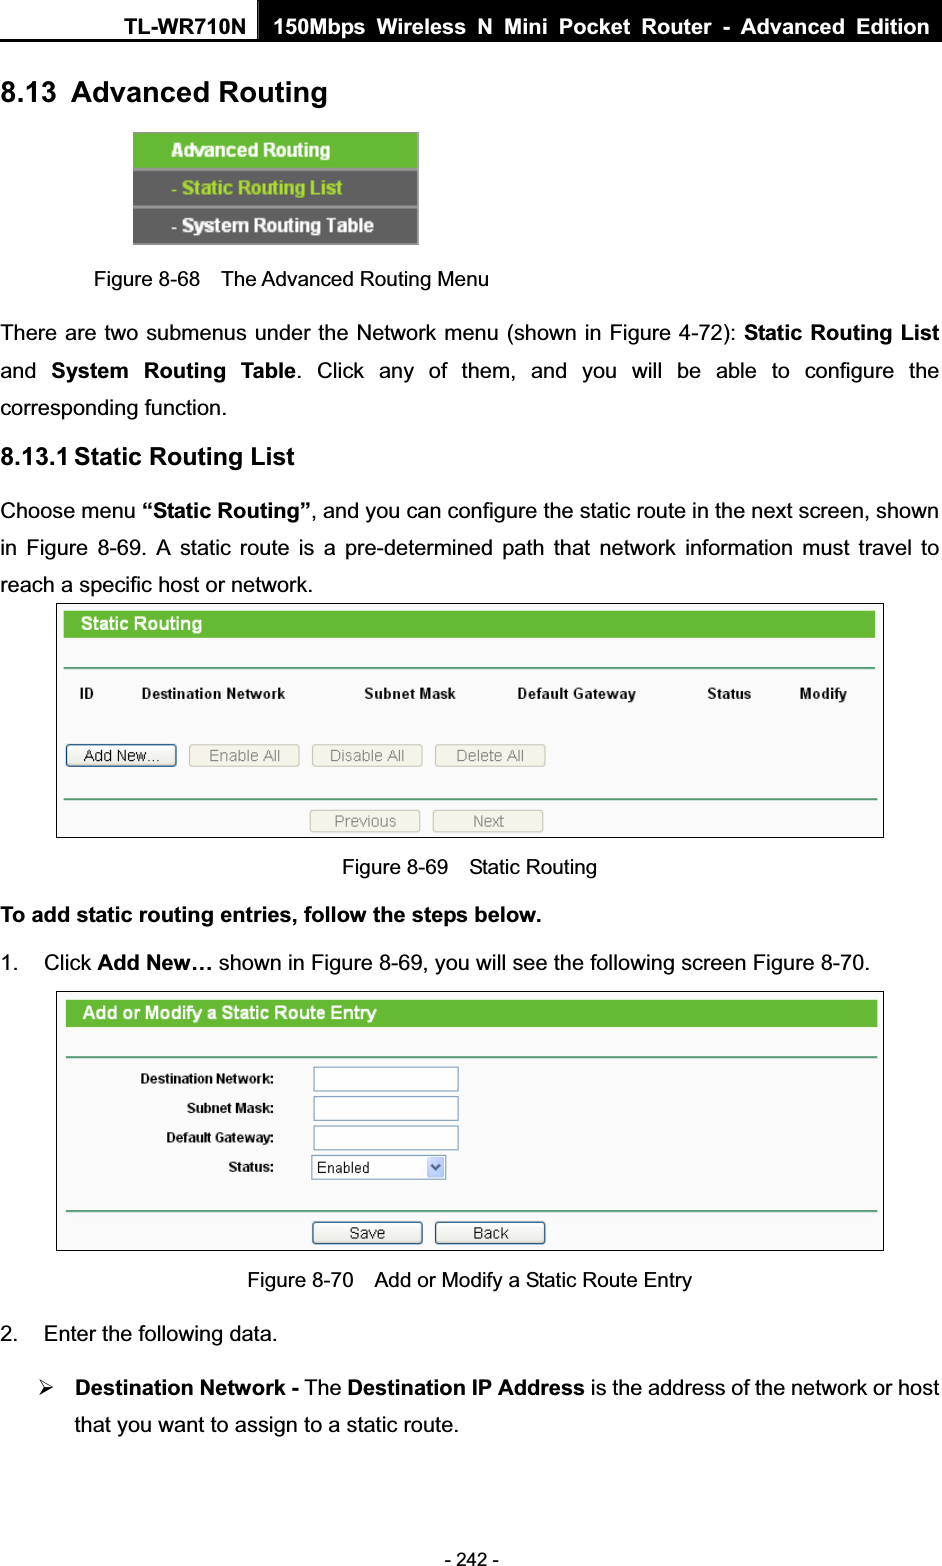 TL-WR710N  150Mbps Wireless N Mini Pocket Router - Advanced Edition- 242 - 8.13 Advanced Routing Figure 8-68  The Advanced Routing Menu There are two submenus under the Network menu (shown in Figure 4-72): Static Routing Listand SystemRouting Table. Click any of them, and you will be able to configure the corresponding function. 8.13.1 Static Routing List Choose menu “Static Routing”, and you can configure the static route in the next screen, shown in Figure 8-69. A static route is a pre-determined path that network information must travel to reach a specific host or network. Figure 8-69  Static Routing To add static routing entries, follow the steps below. 1. Click Add New… shown in Figure 8-69, you will see the following screen Figure 8-70.   Figure 8-70    Add or Modify a Static Route Entry 2.  Enter the following data. ¾Destination Network - The Destination IP Address is the address of the network or host that you want to assign to a static route. 